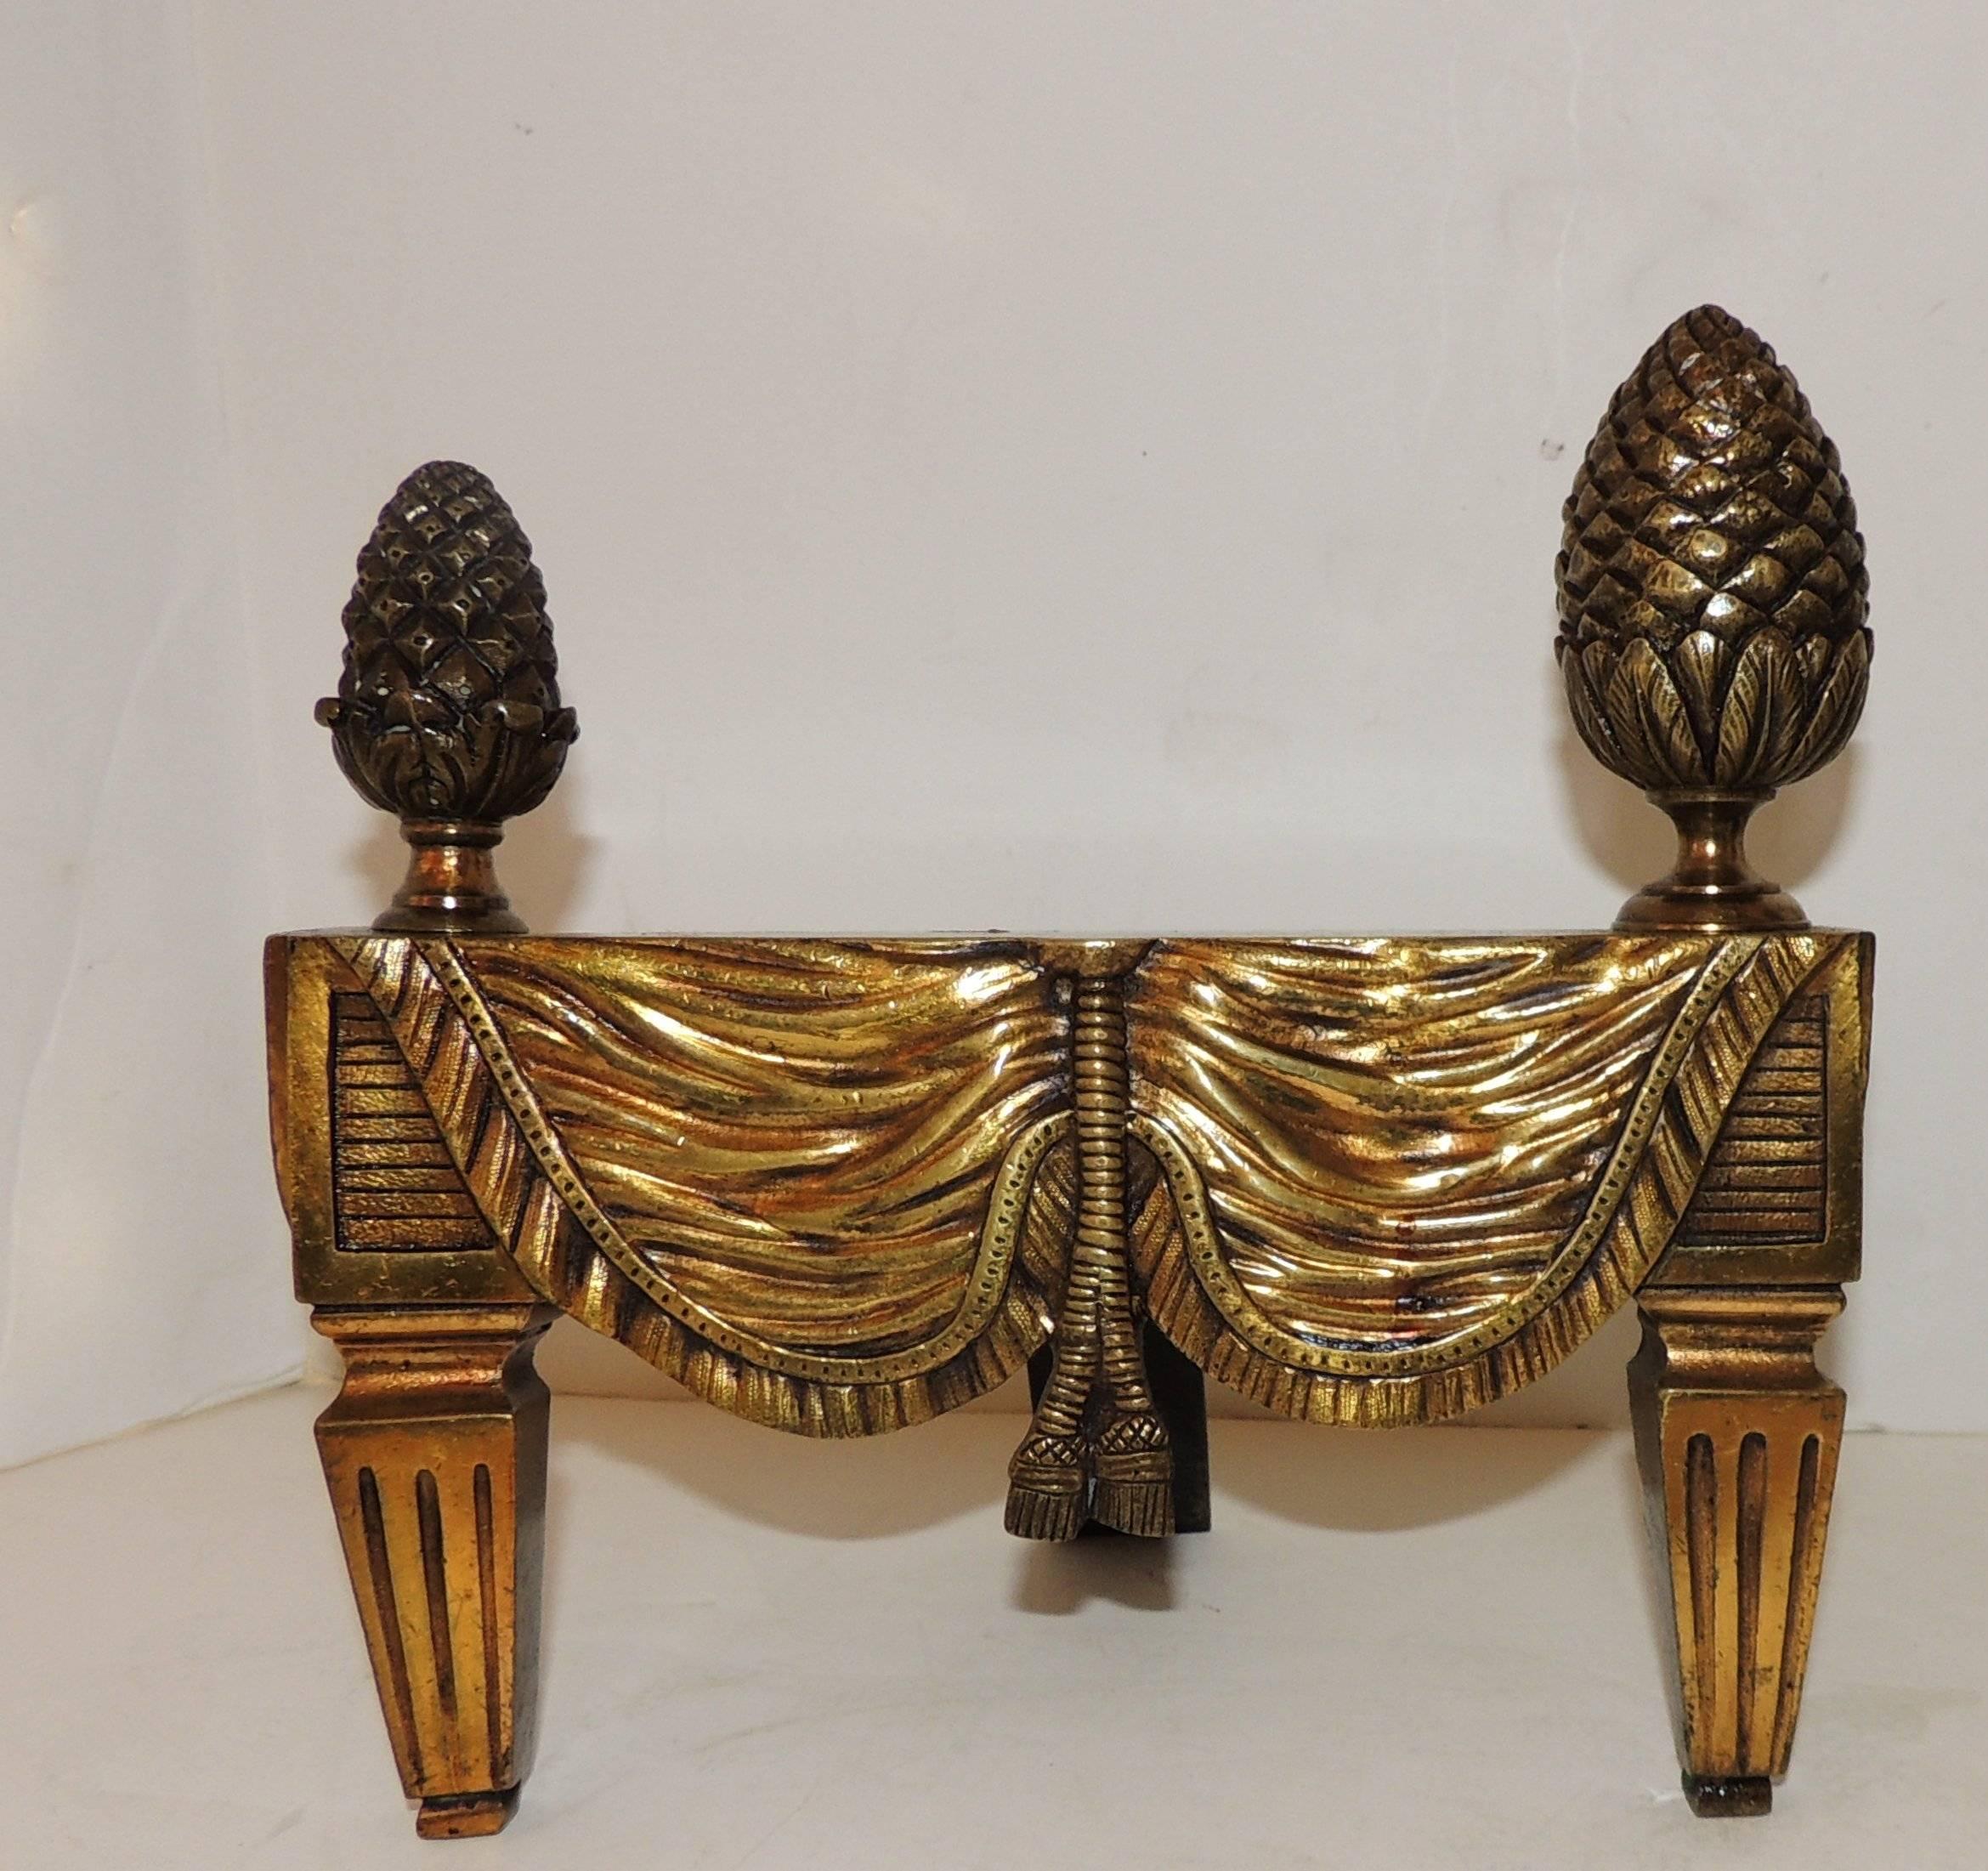 Gilt Wonderful French Bronze Neoclassical Fireplace Draped Fabric Chenets Andirons For Sale